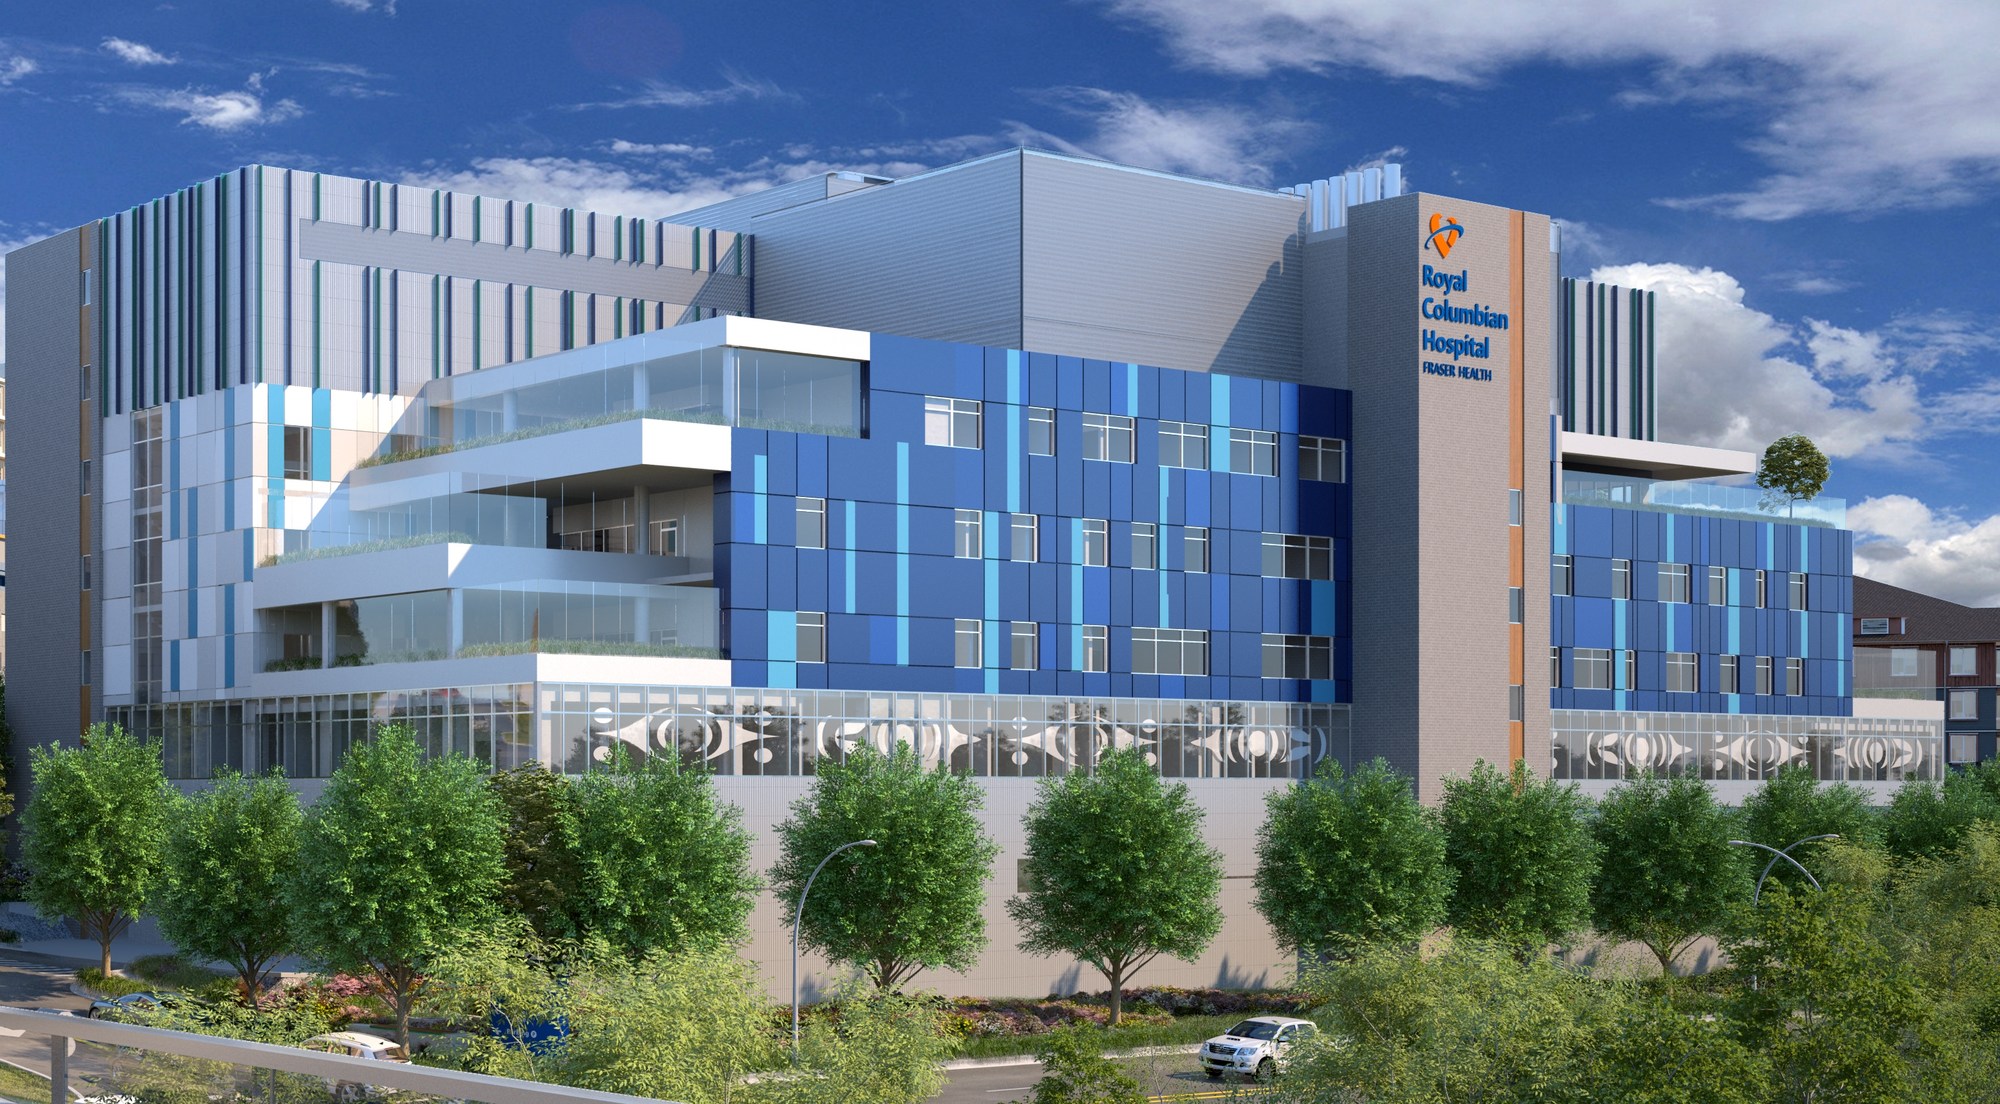 industry-hospital-RoyalColumbian1 Completed Projects